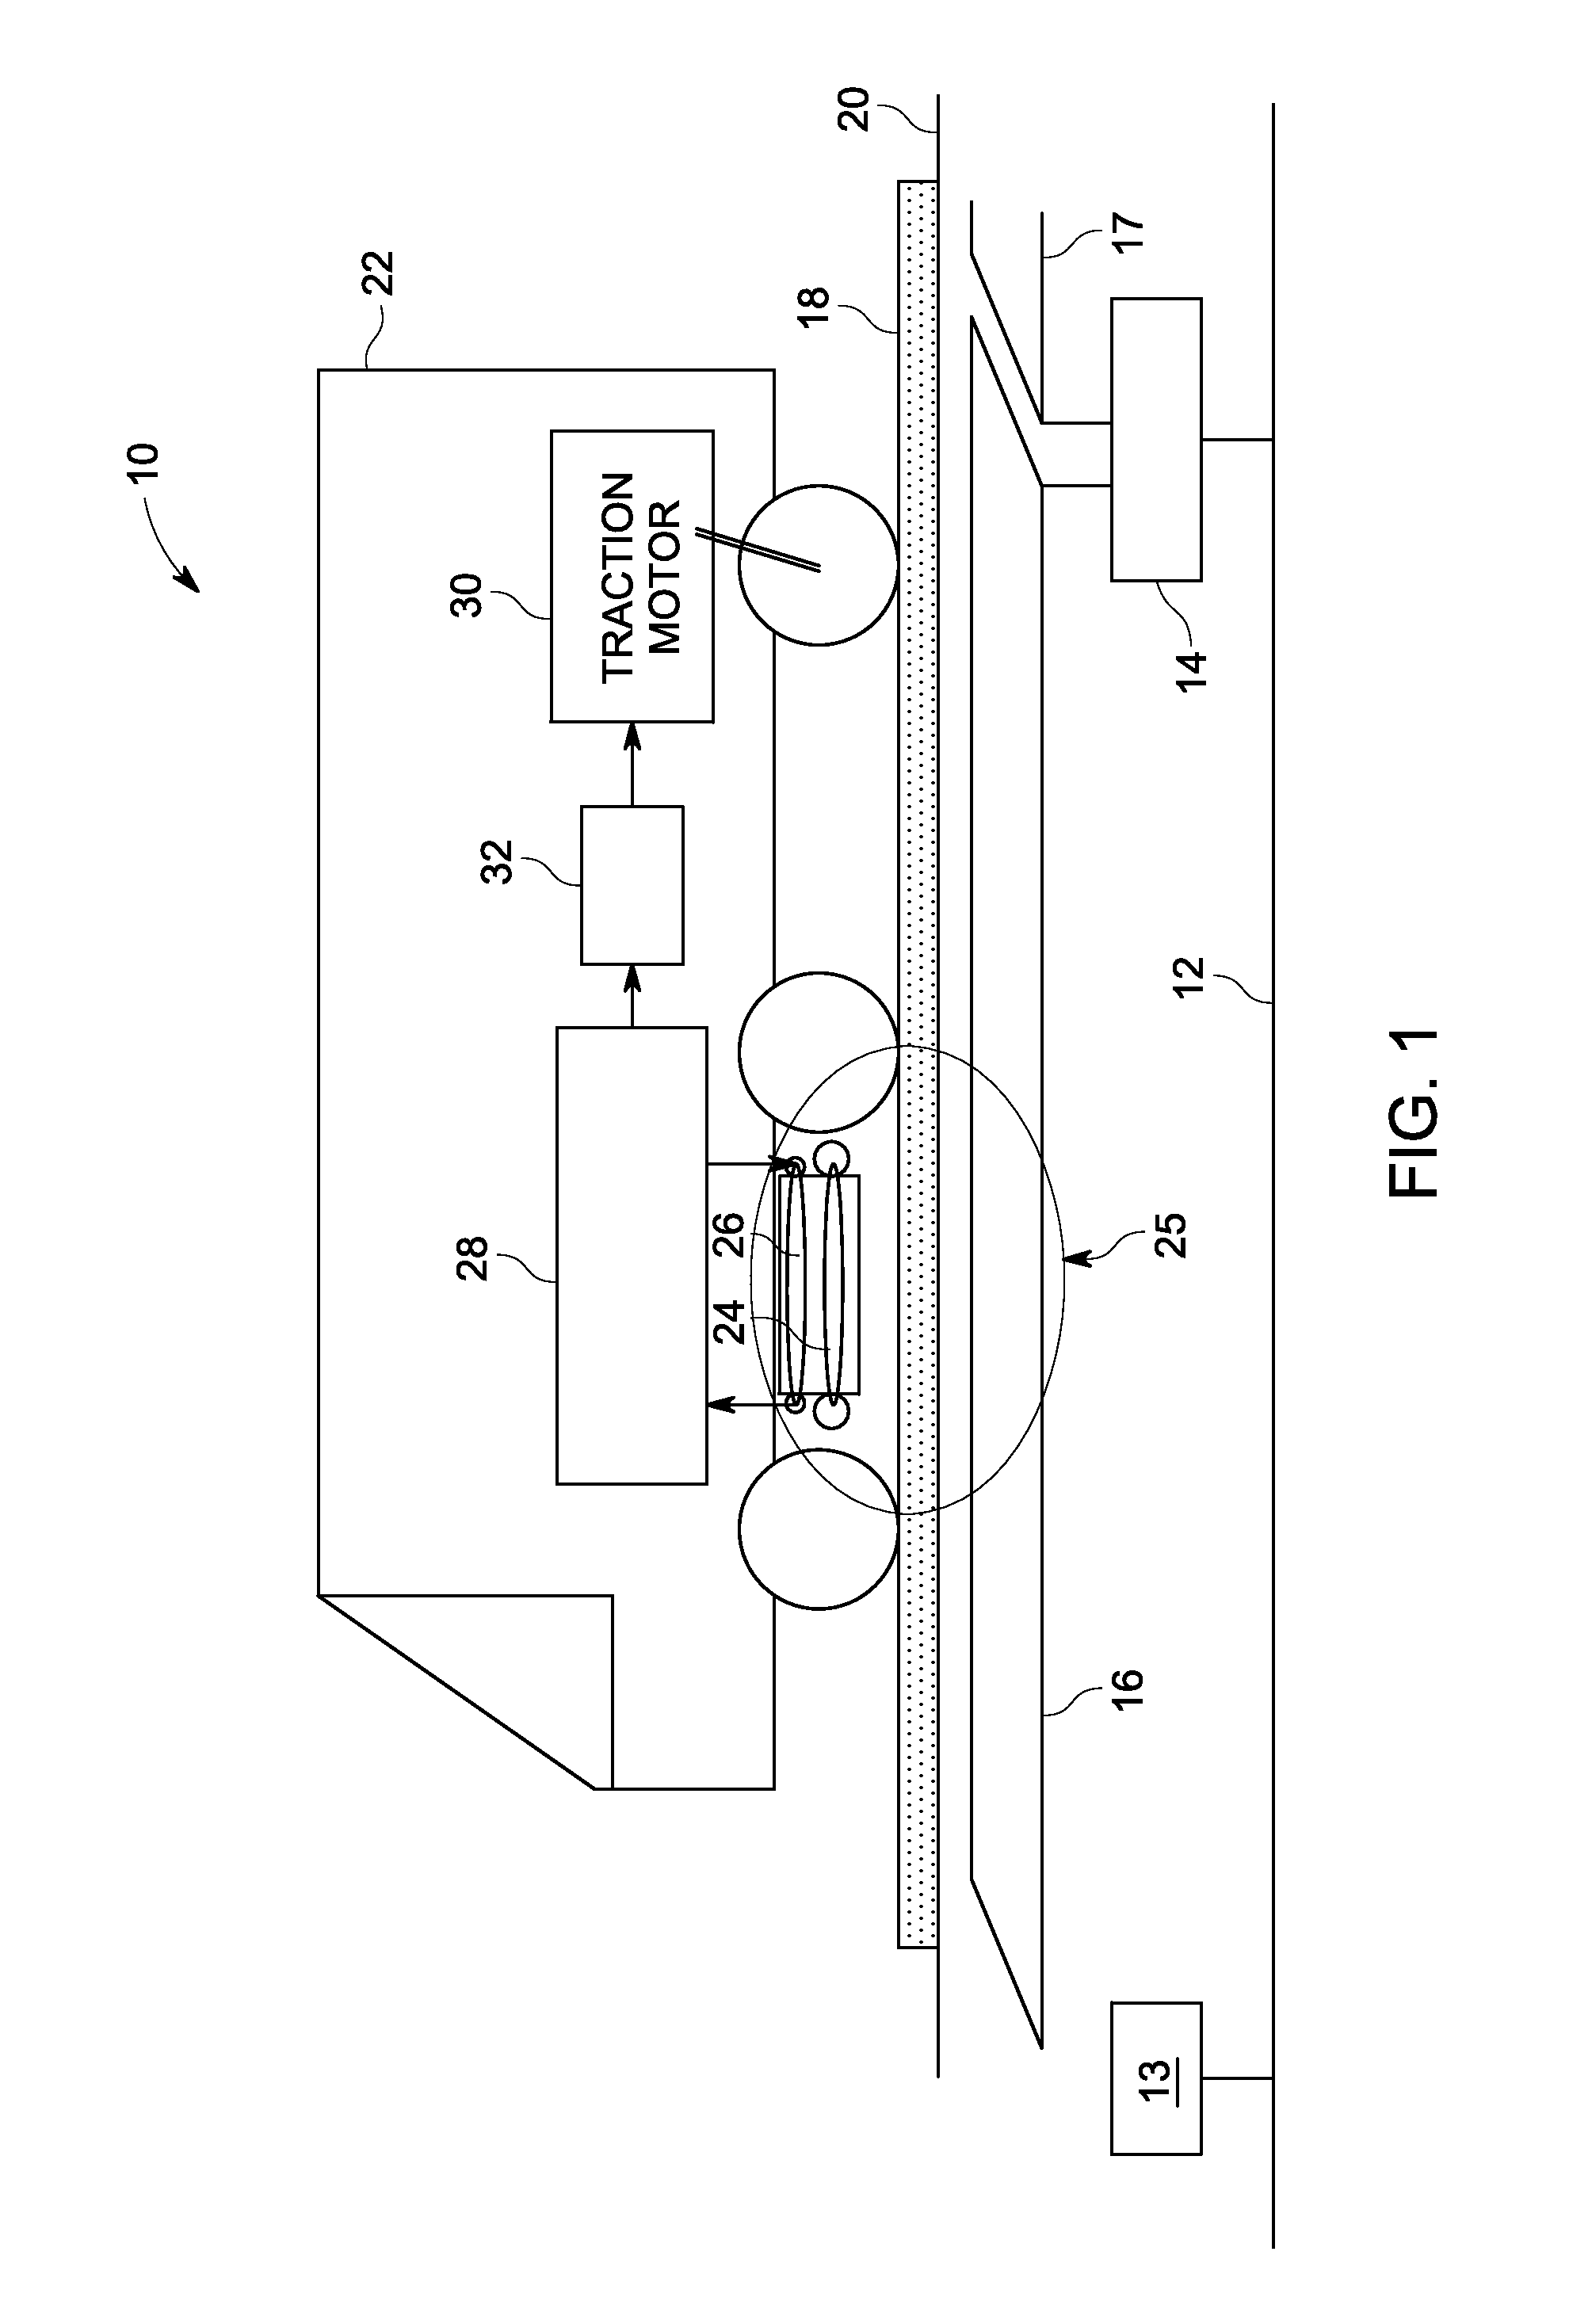 Power transfer system and method